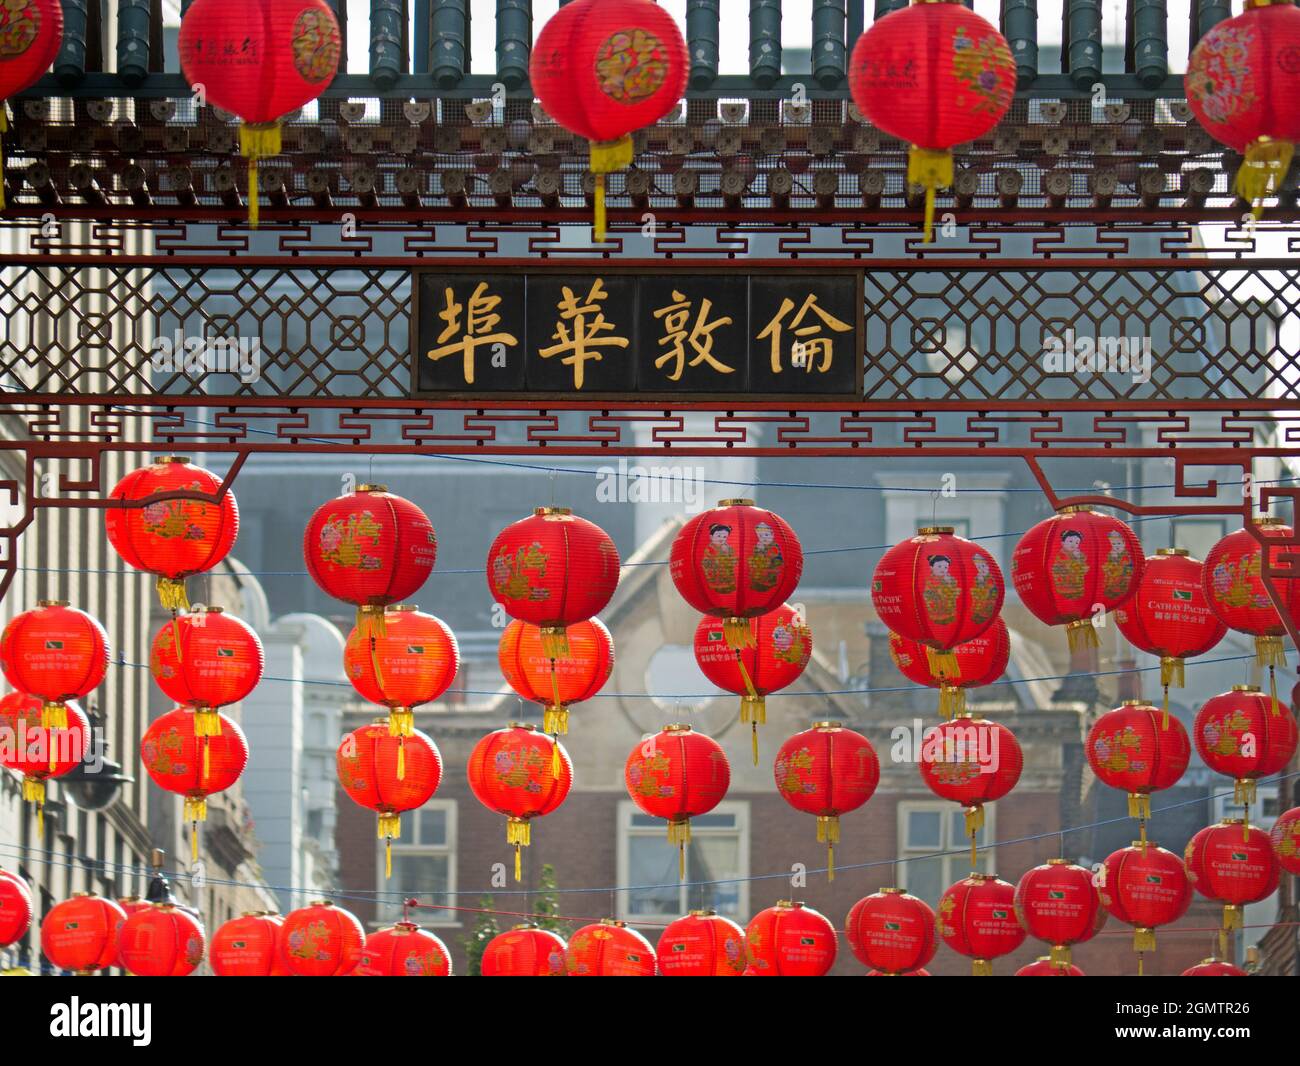 Chinatown, London decorated with traditional red lanterns during the Spring Festival of Chinese New Year. Festivals at the turn of the  Lunar Year are Stock Photo